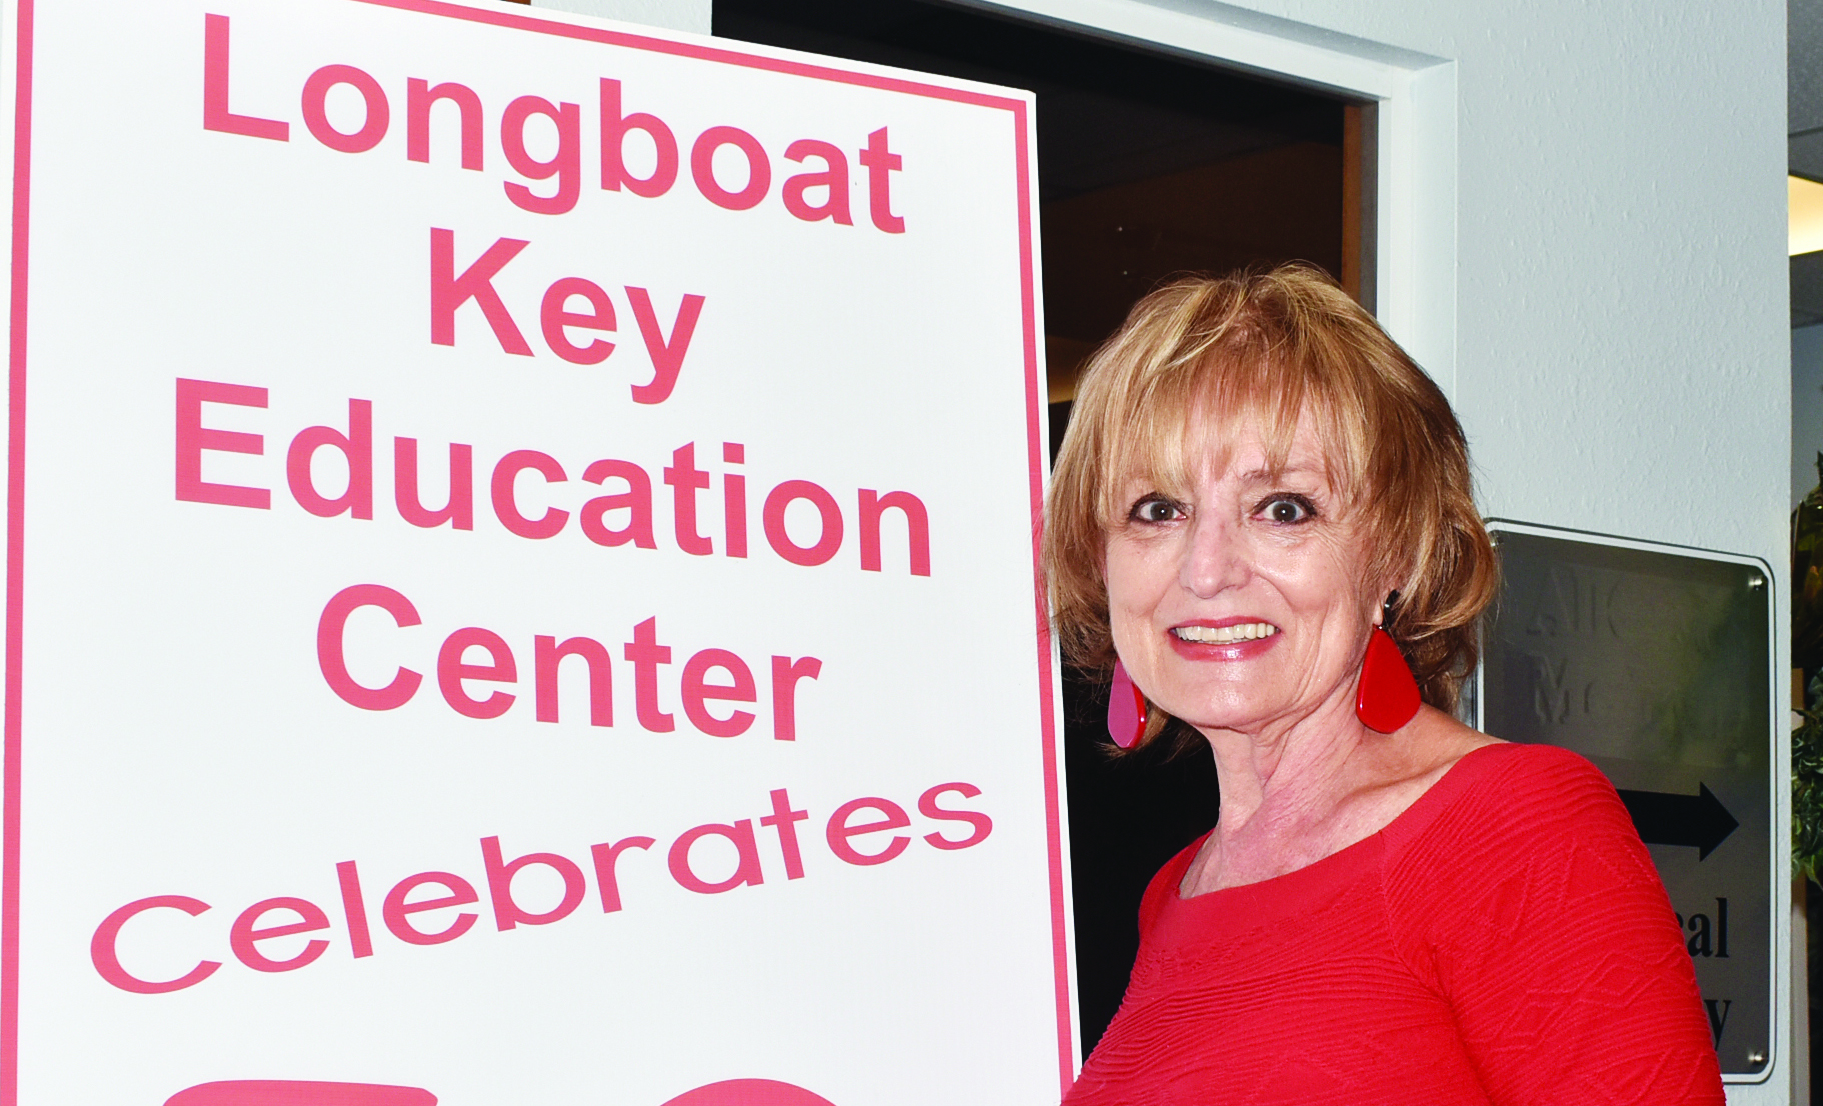 Susan Goldfarb has been executive director of the Longboat Key Education Center for 26 years.